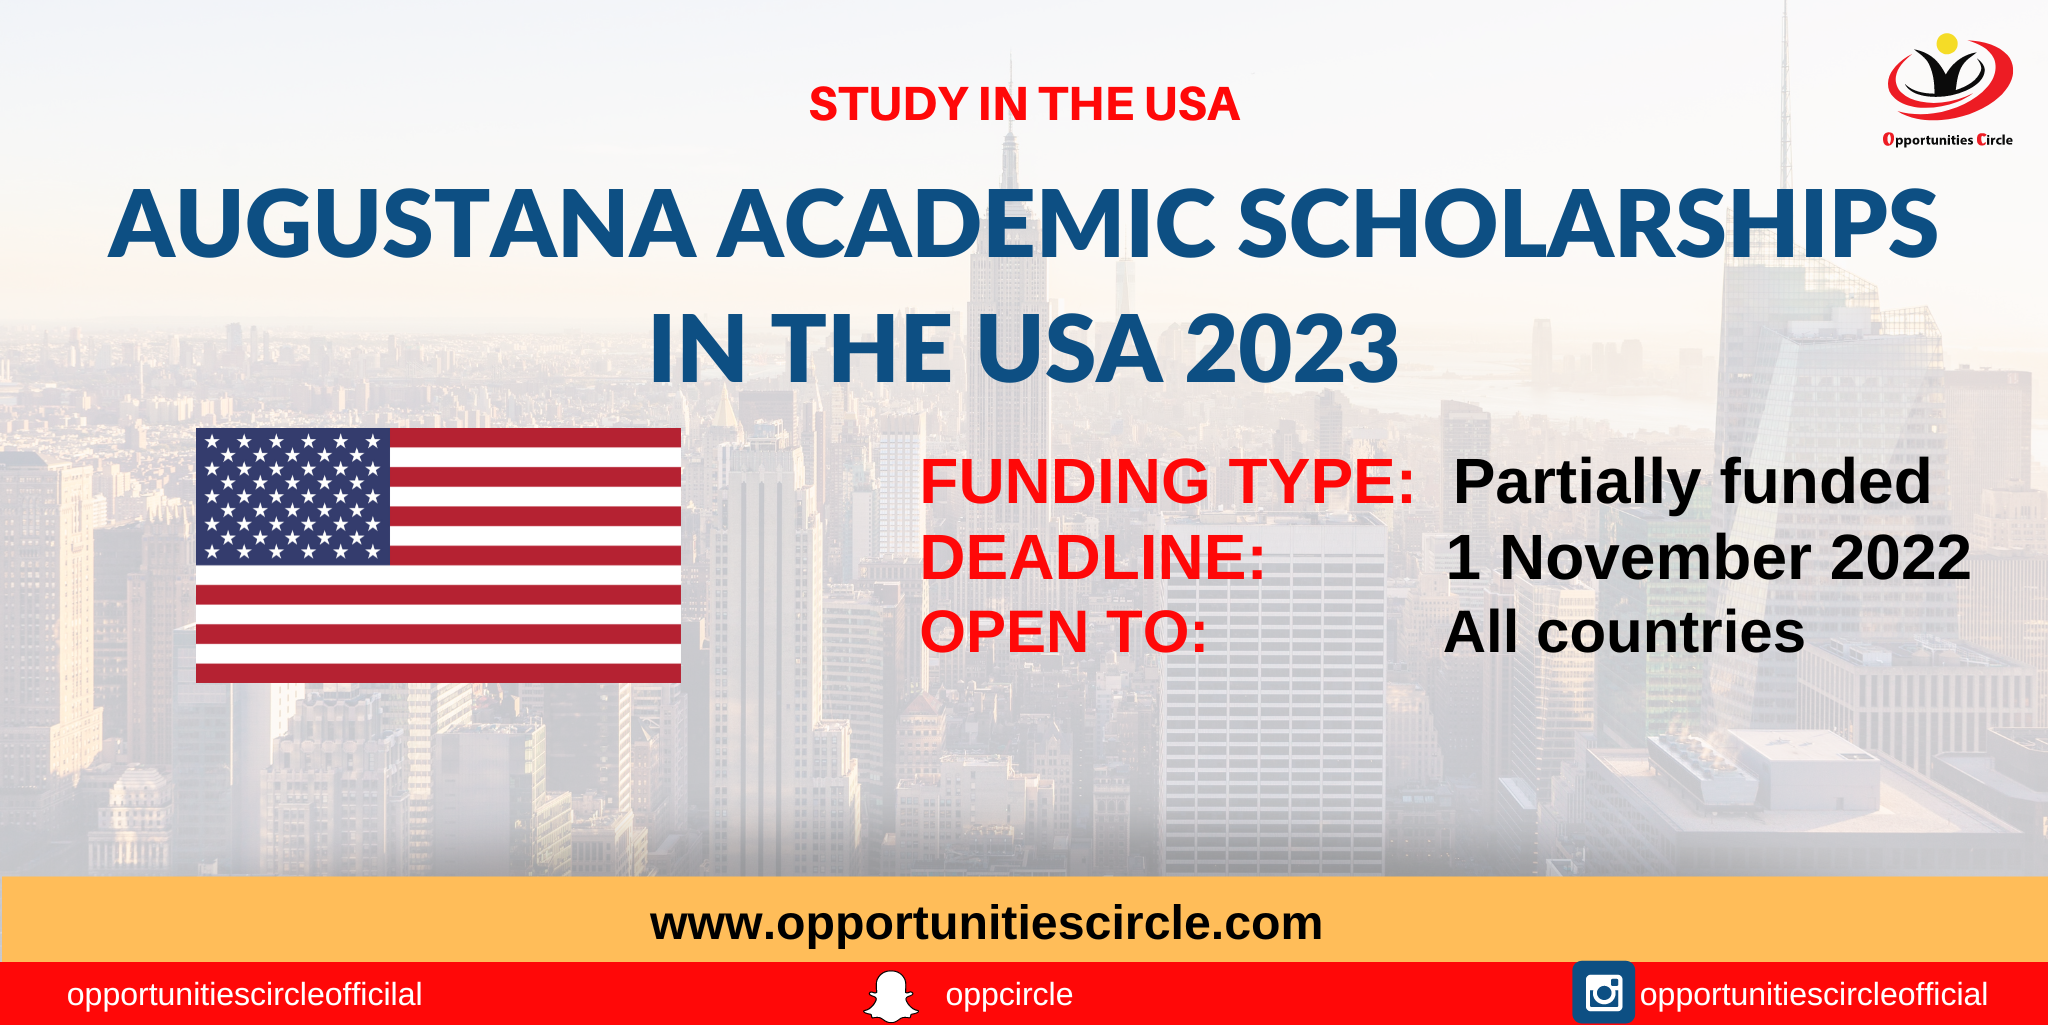 Augustana Academic Scholarships in the USA 2023 Opportunities Circle